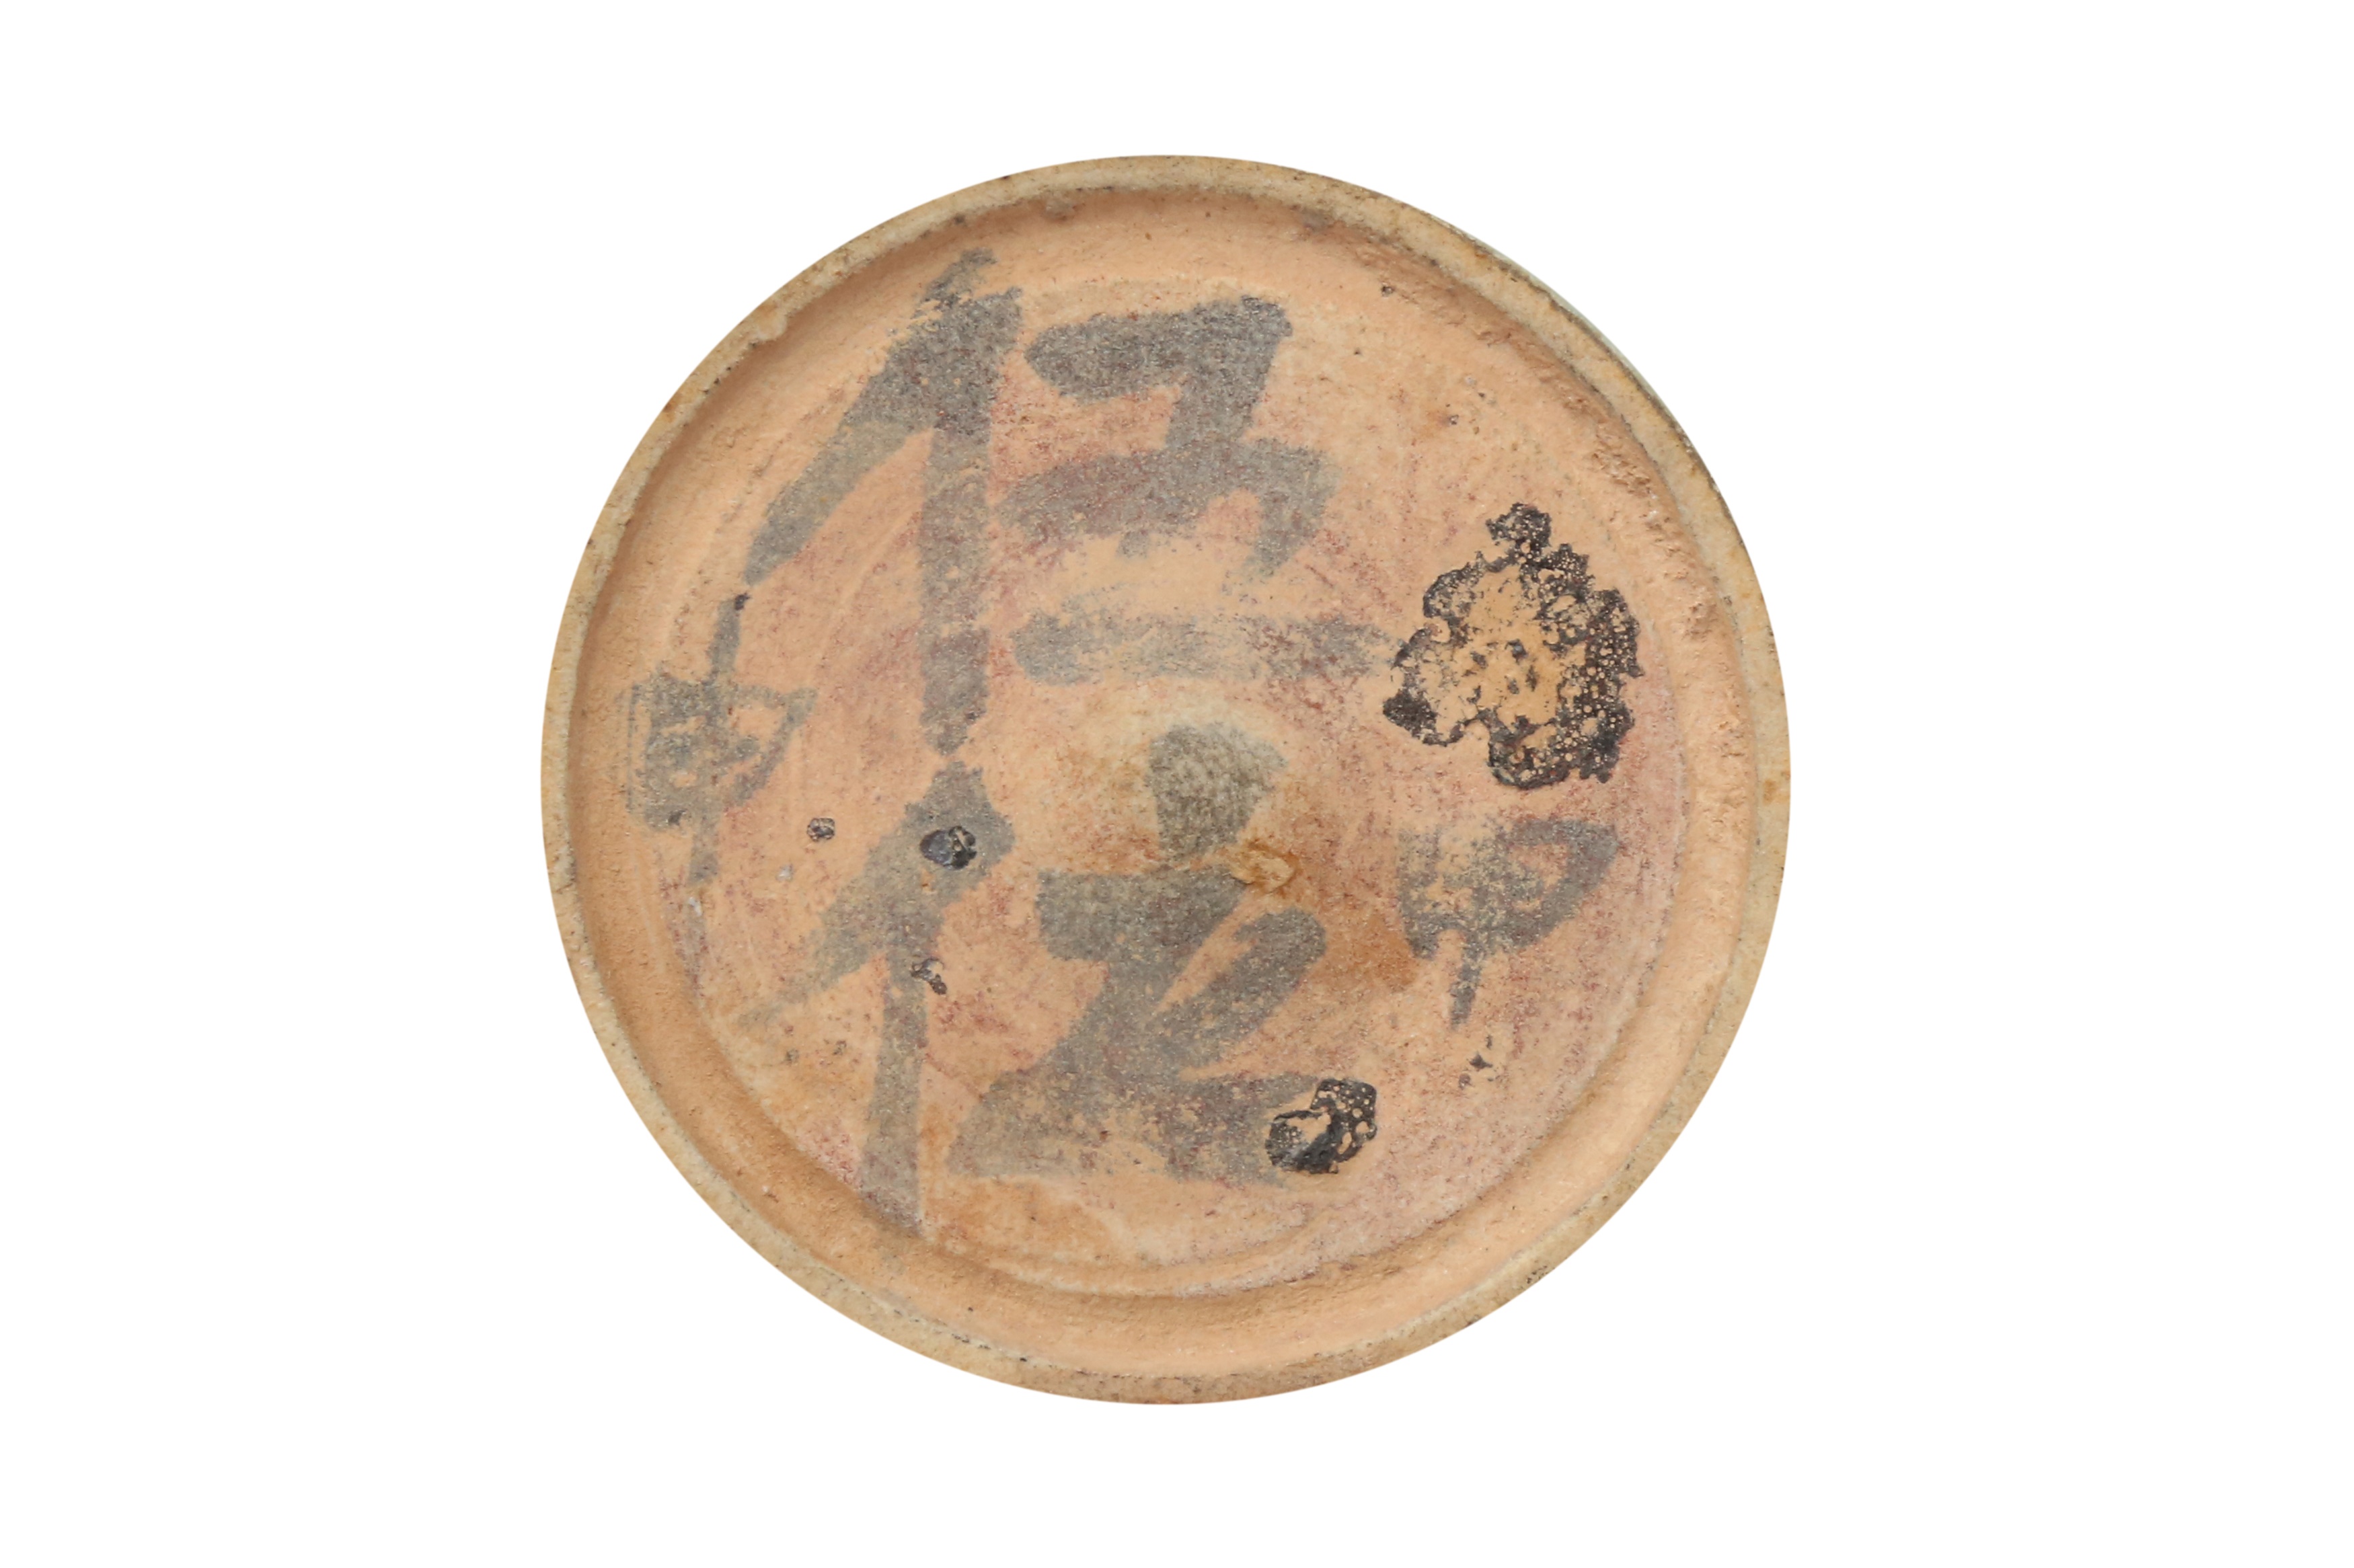 A CHINESE QINGBAI INCISED BOWL 南宋 青白盌 - Image 3 of 3